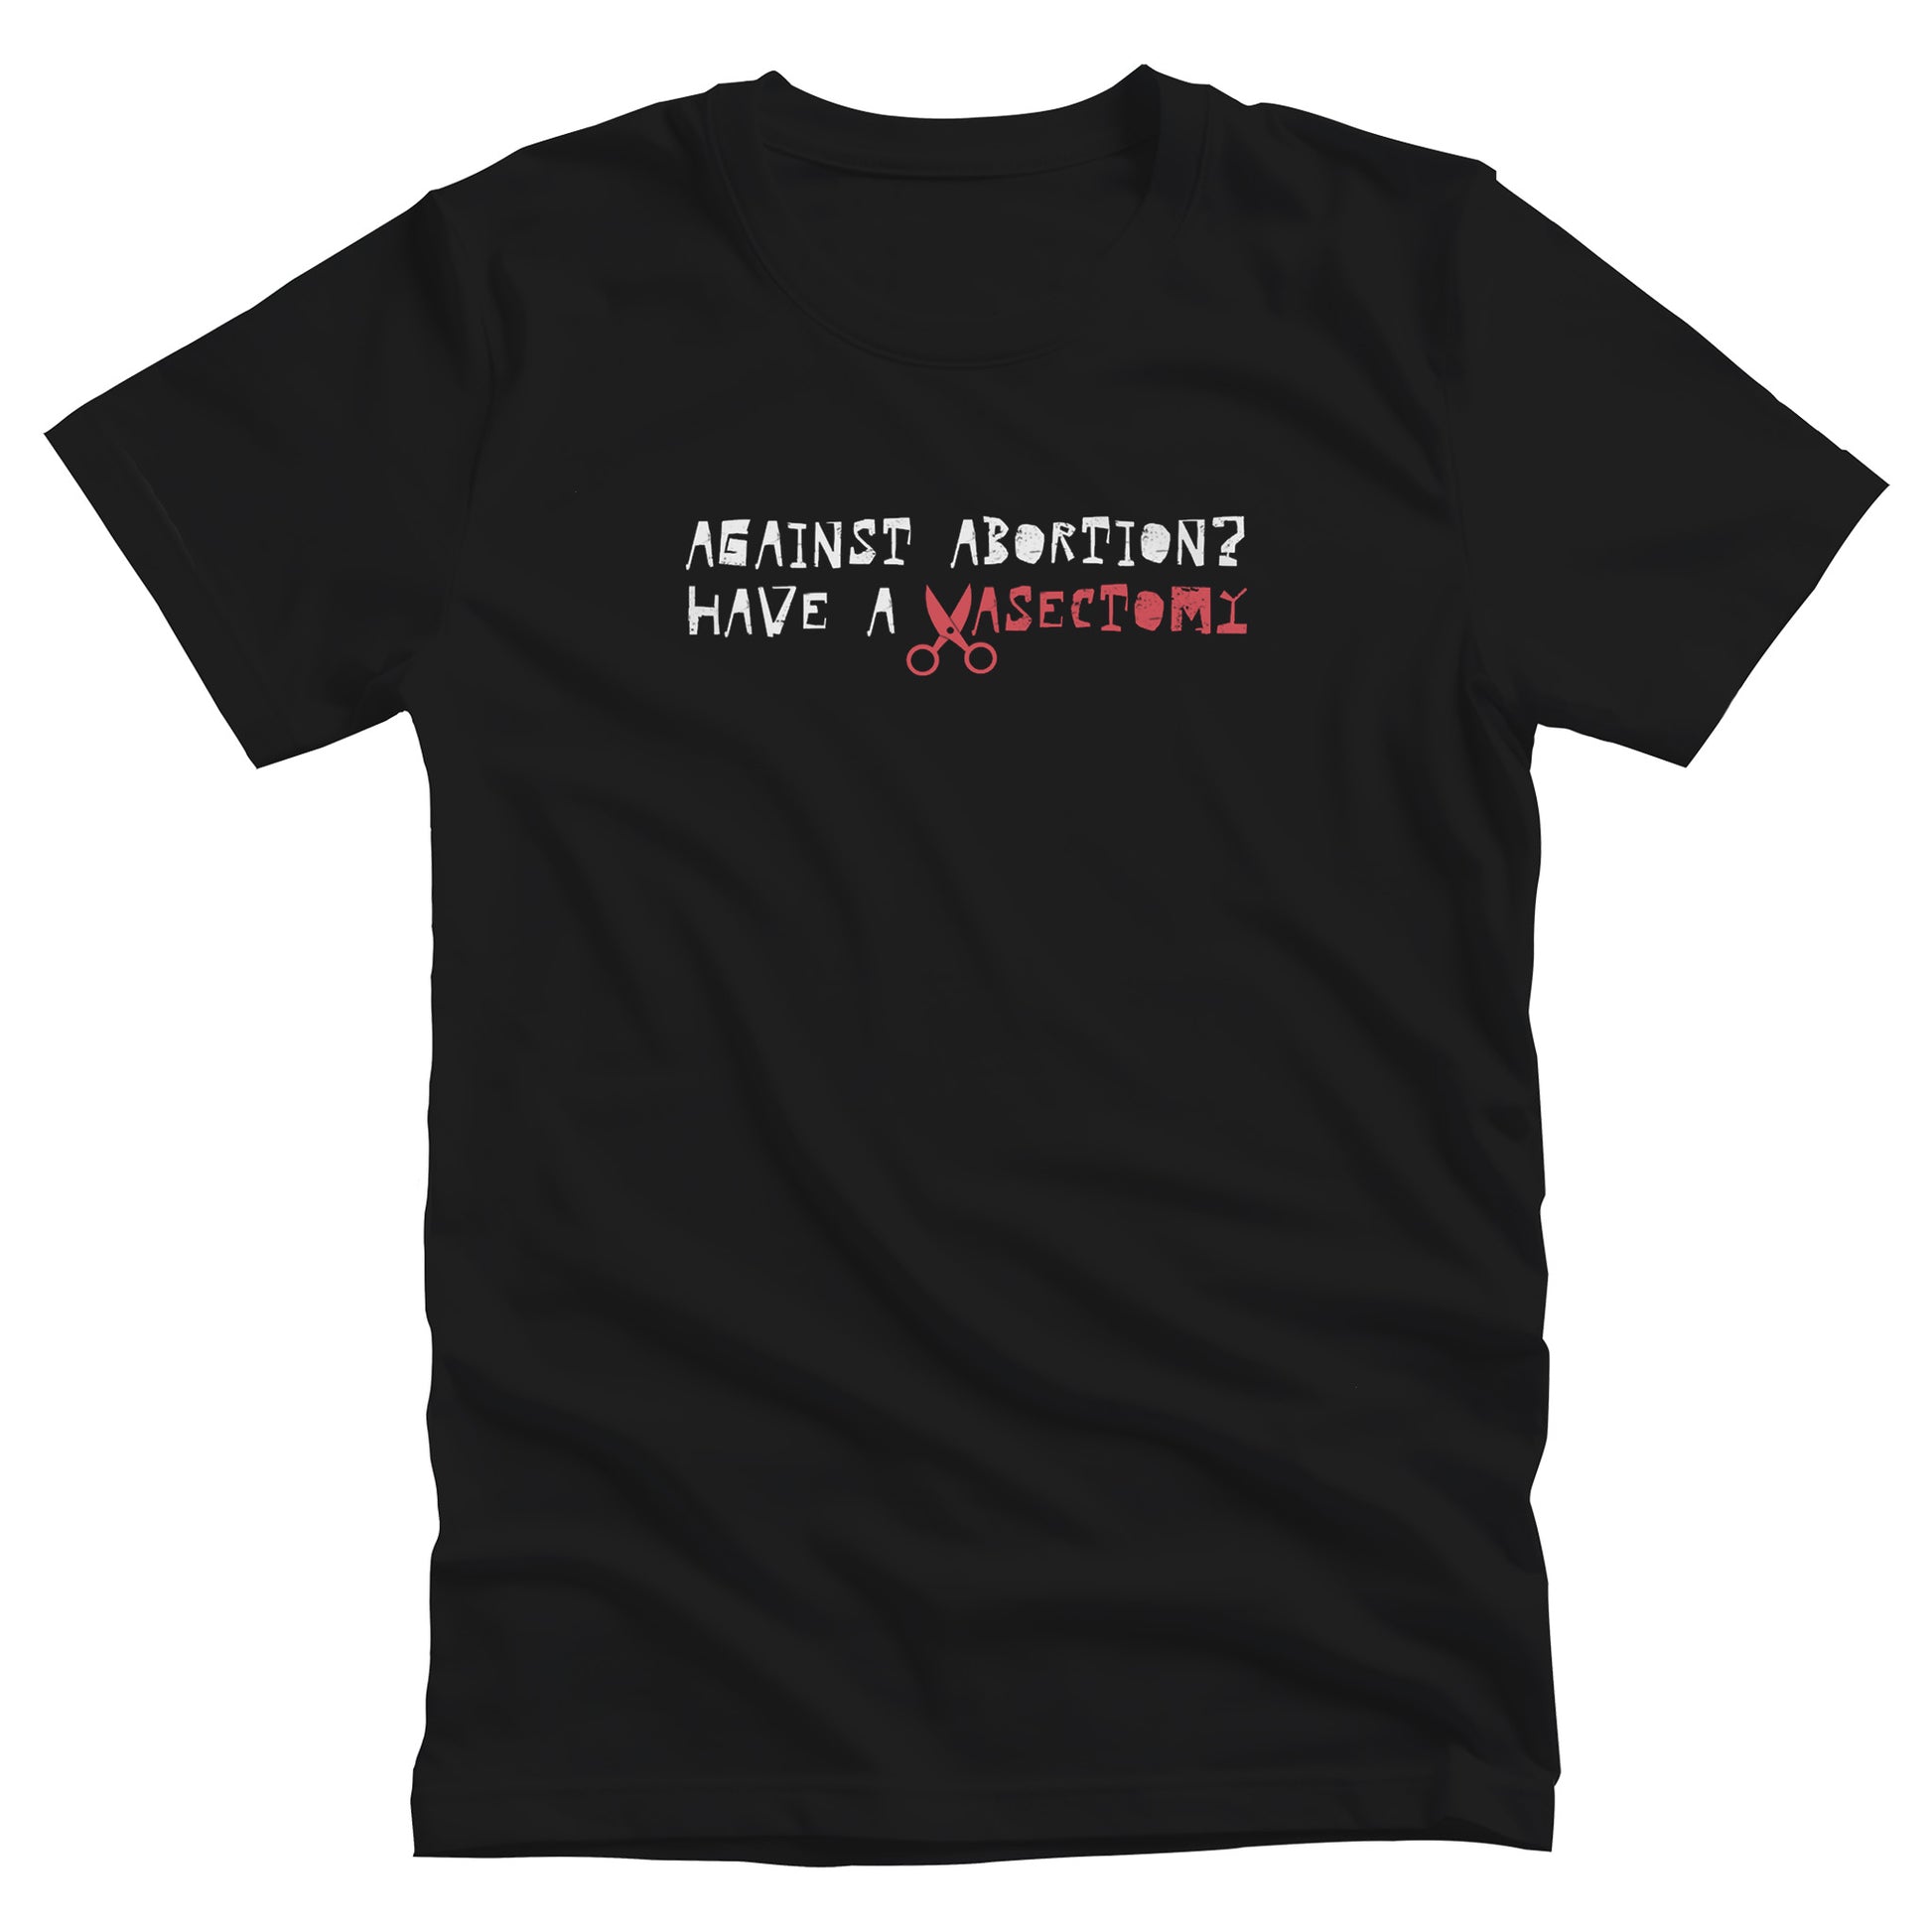 Black unisex t-shirt that says, “Against Abortion? Have a Vasectomy” in all caps. The word “Vasectomy” is red and the “V” is scissors.